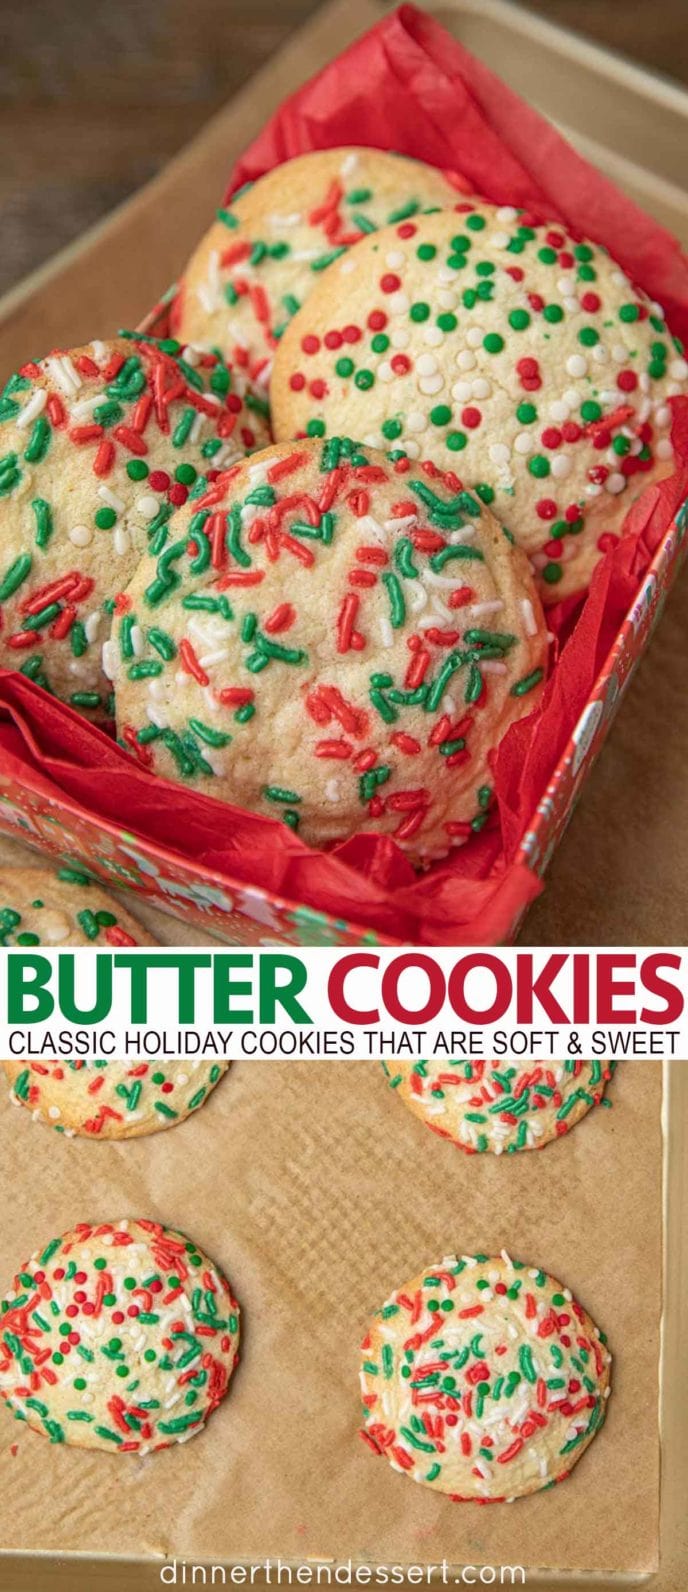 Butter Cookies in a Christmas box